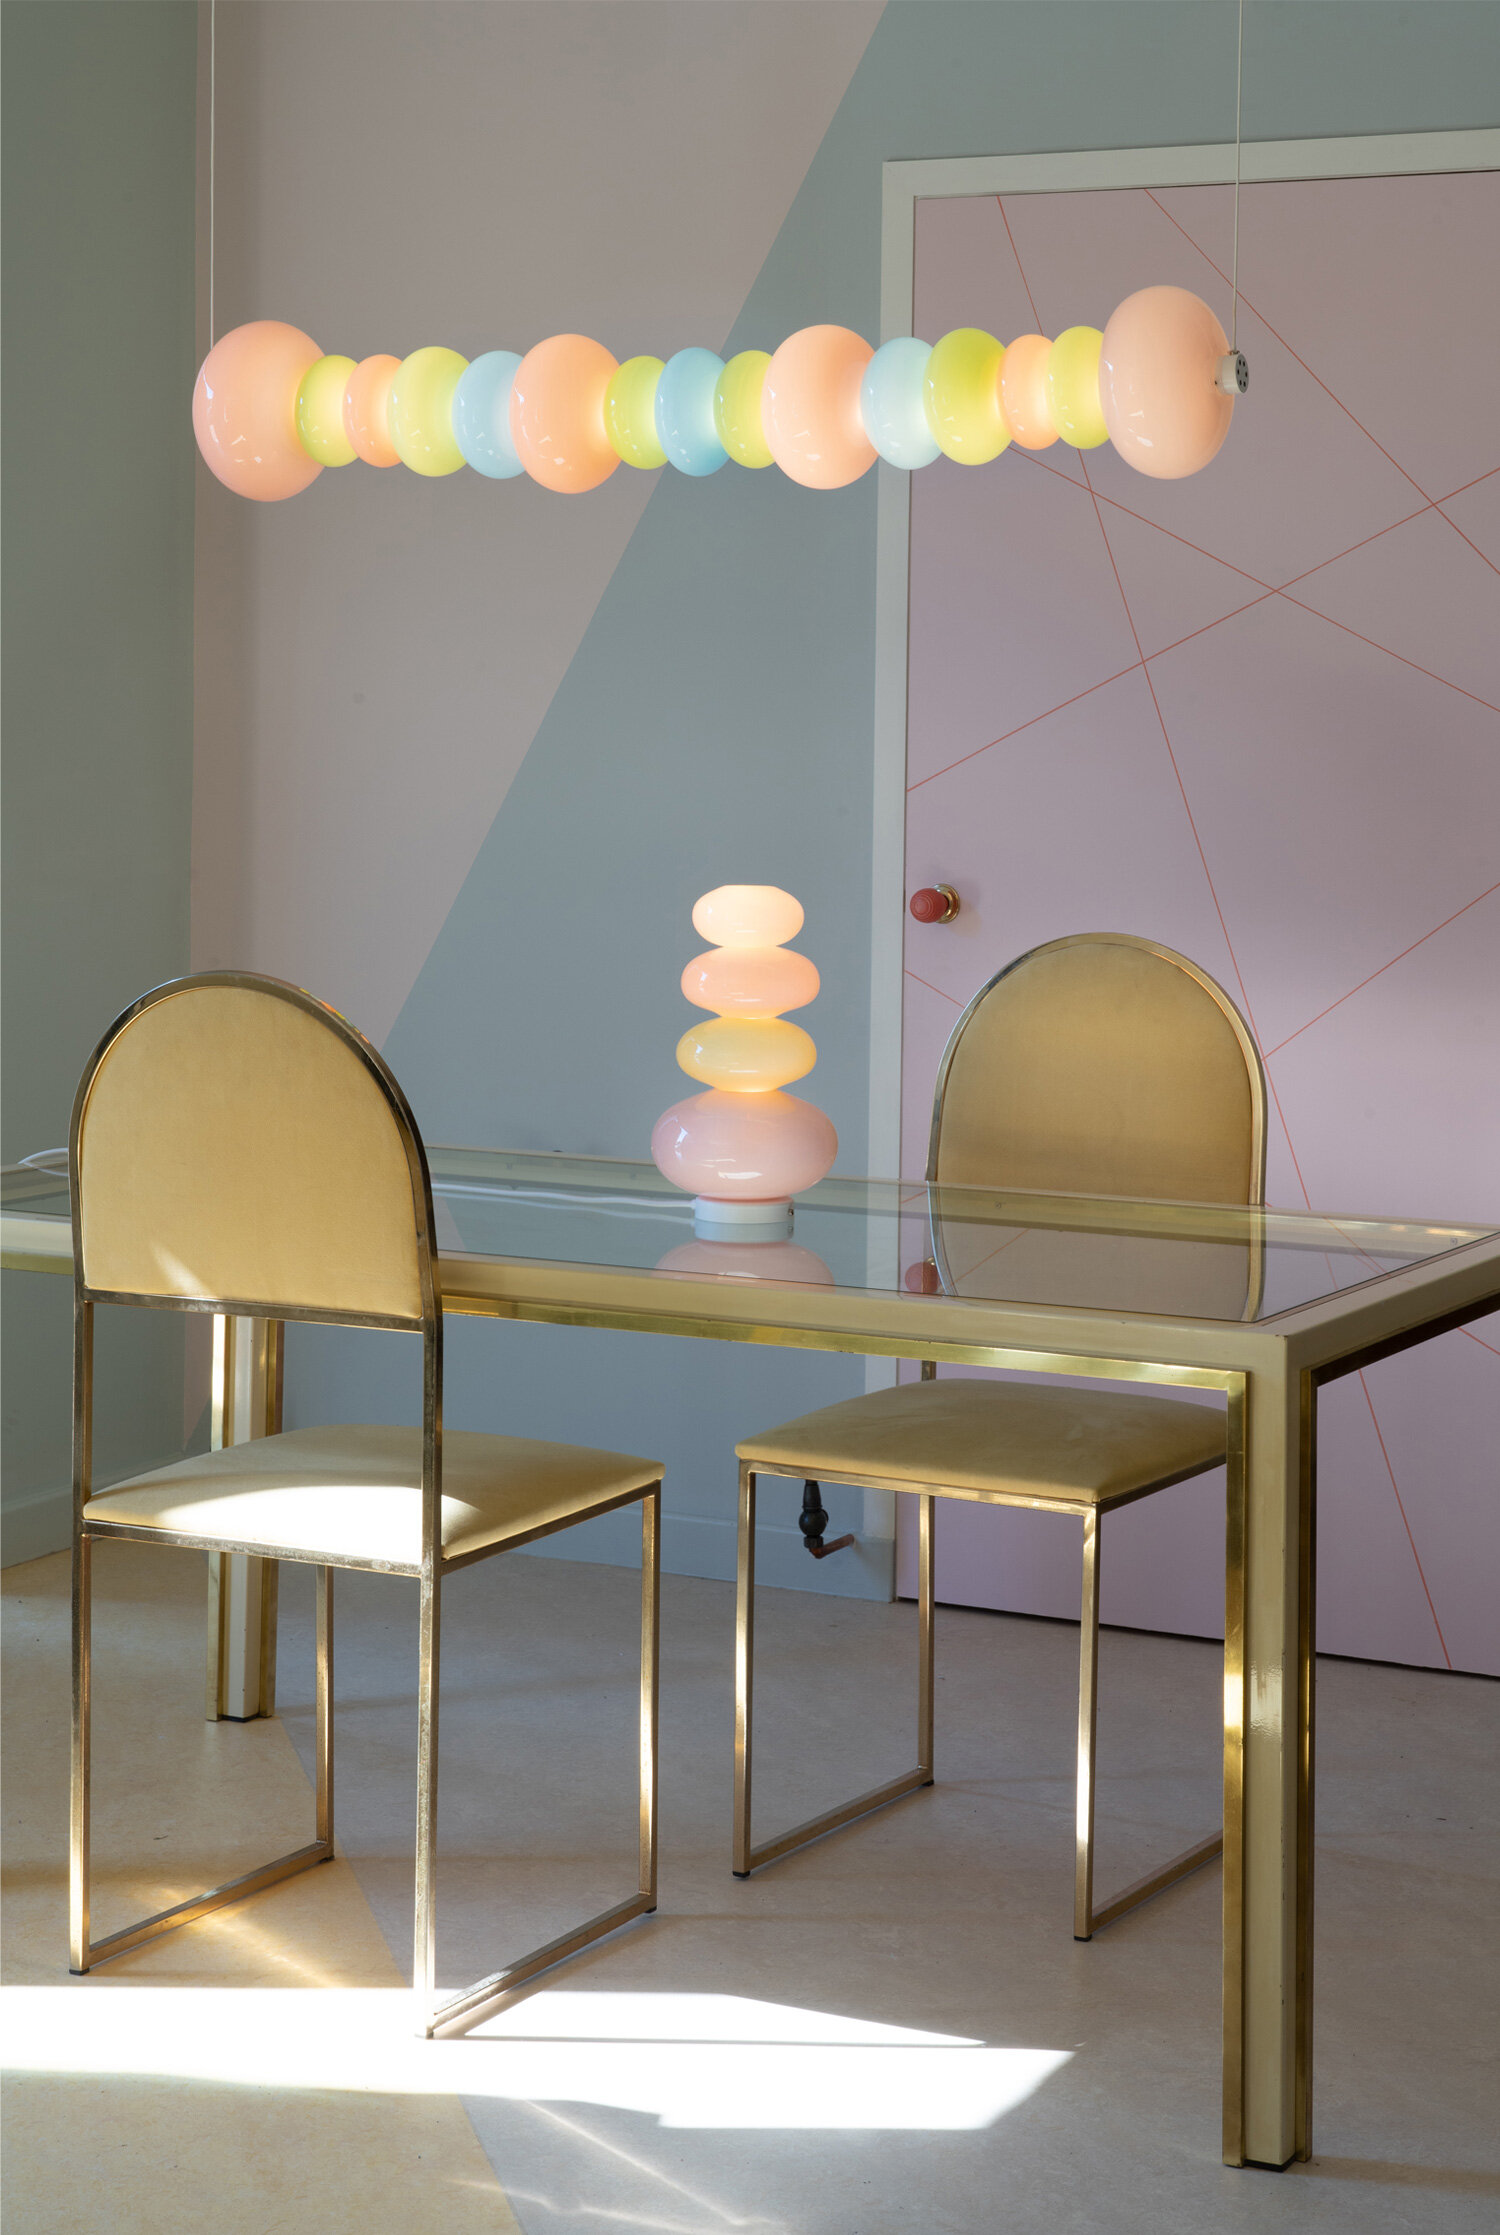 The Glowbule Beam Pendants are 1.2m in length, conjoining individually hand-blown orbs that create a continuous band of light to show off the material to its best effect. Photo by Chris Webb